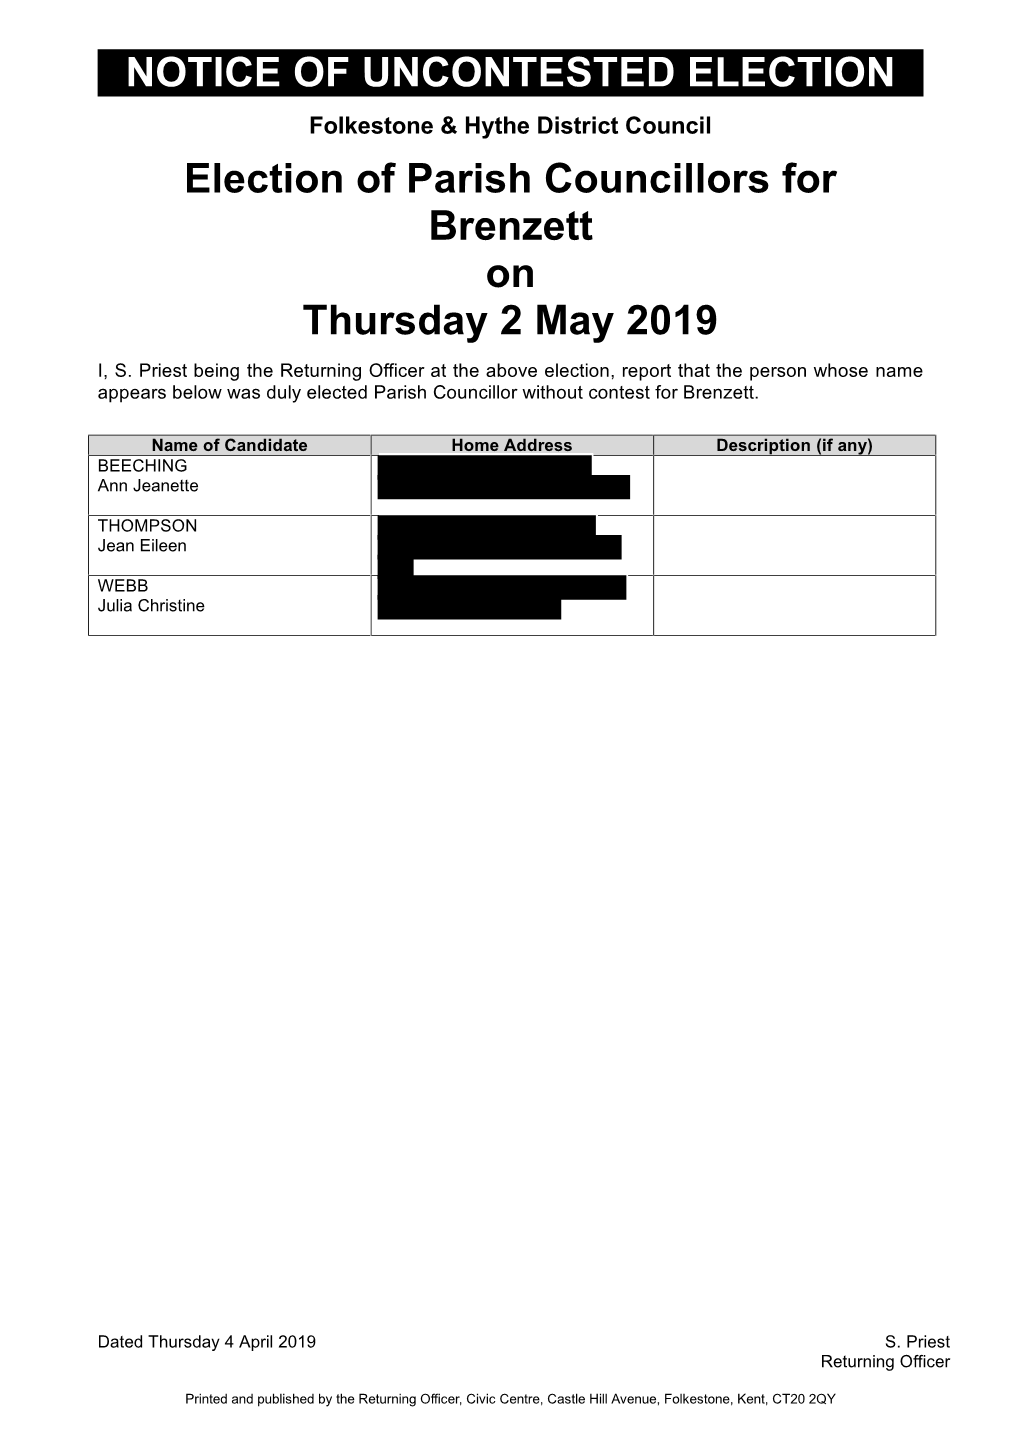 NOTICE of UNCONTESTED ELECTION Folkestone & Hythe District Council Election of Parish Councillors for Brenzett on Thursday 2 May 2019